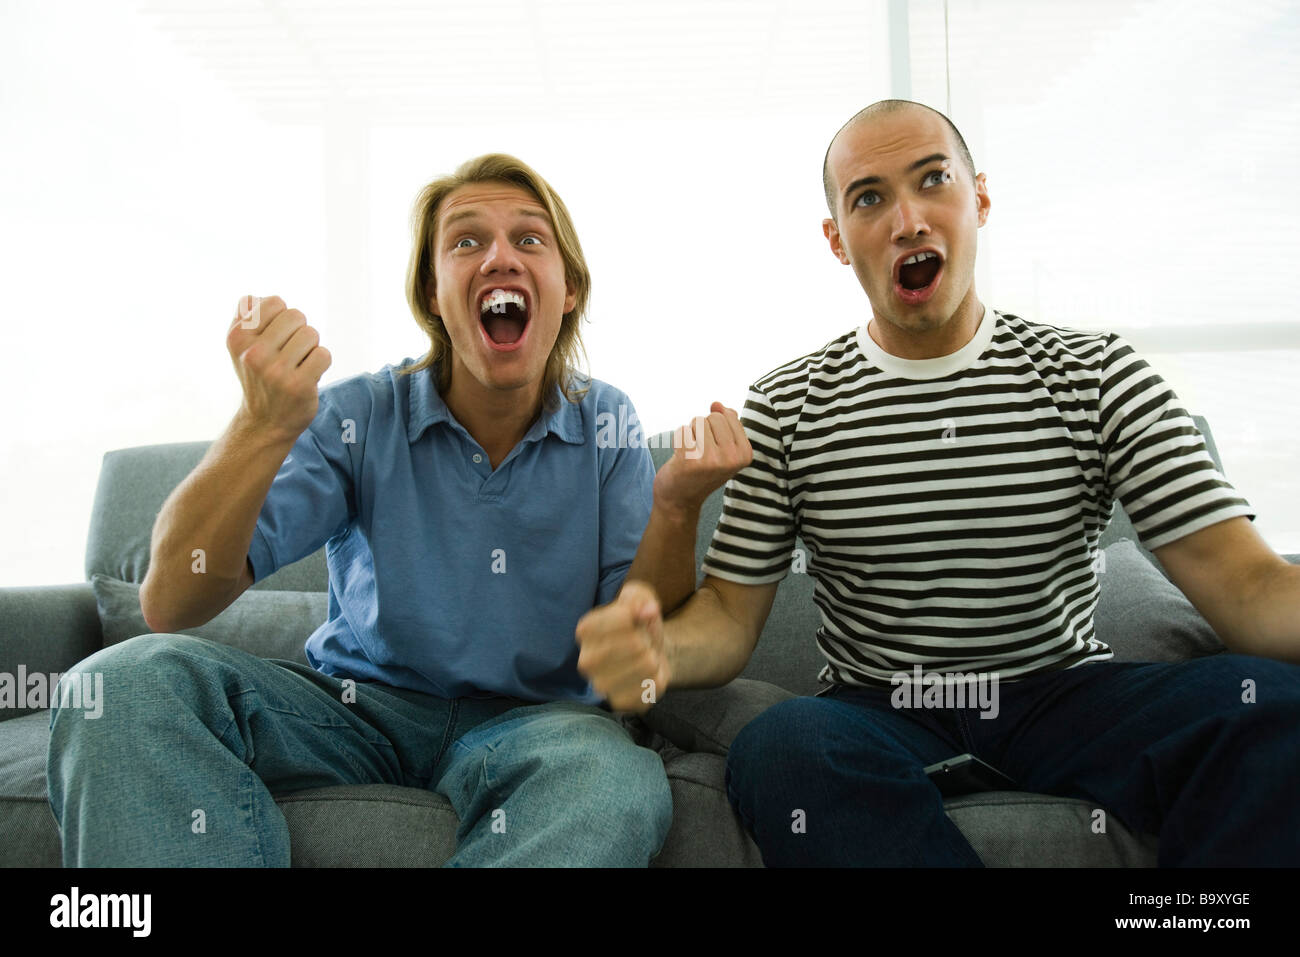 Two men sitting on sofa watching TV, cheering with clenched fists Stock Photo